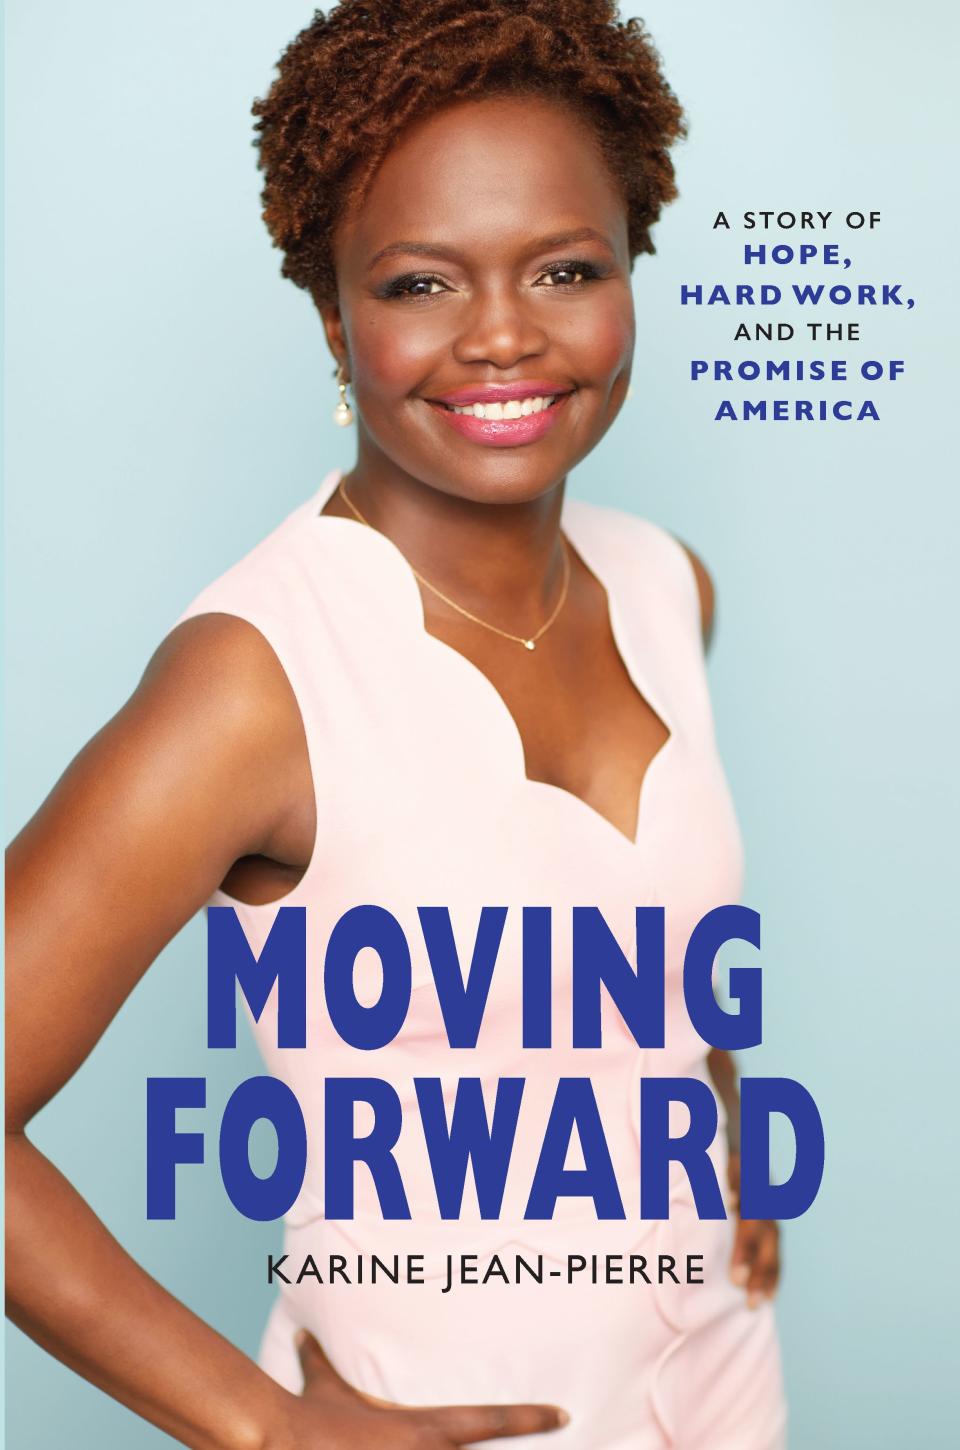 Moving Forward is available now.